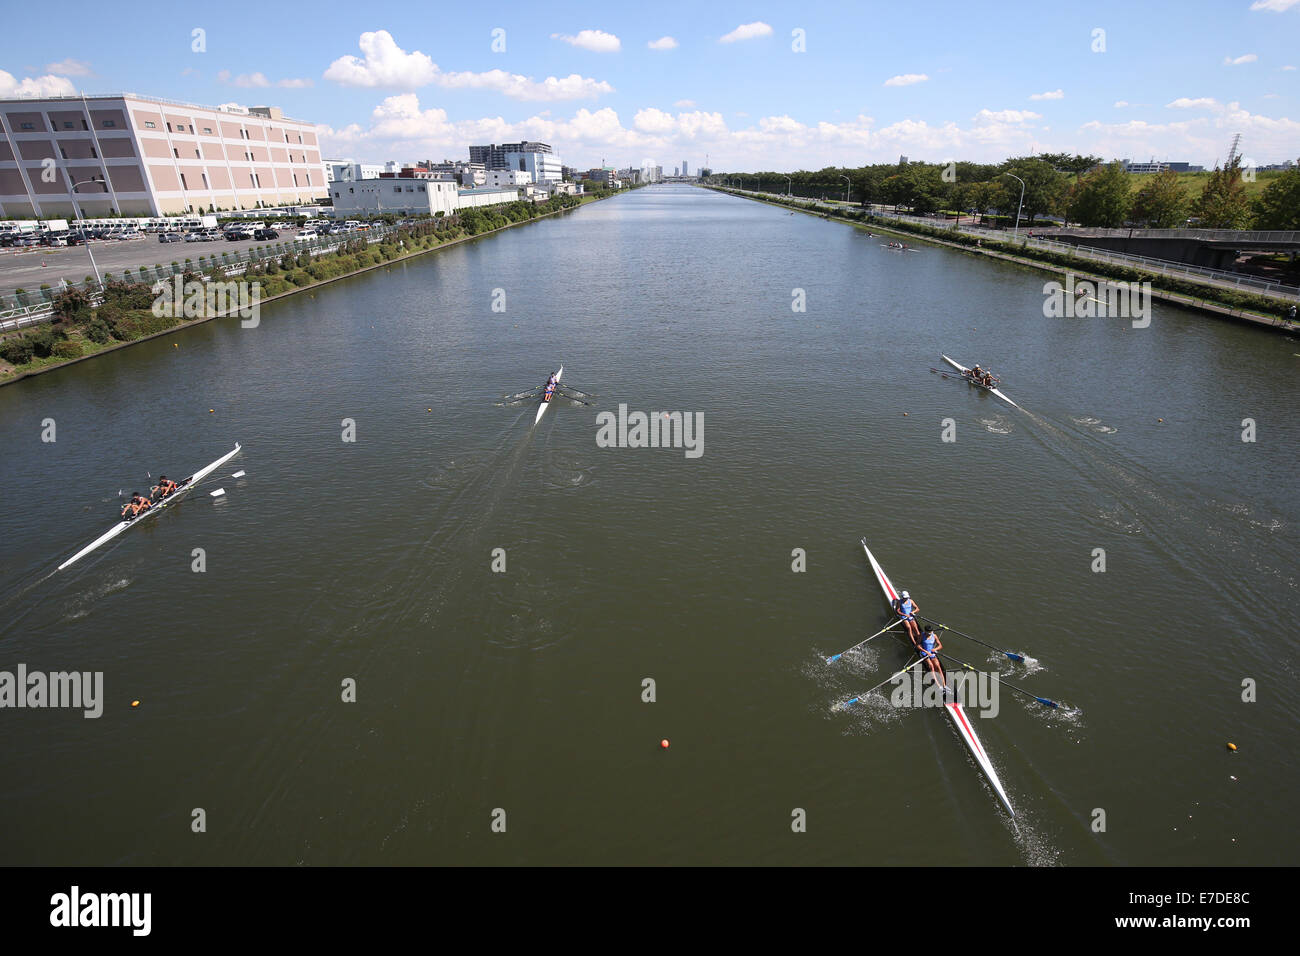 General View of Toda Olympic Rowing Course SEPTEMBER 14, 2014 - Rowing : The 92nd All Japan Rowing Championships at the Toda Olympic Rowing Course, Saitama, Japan. Credit:  Shingo Ito/AFLO/Alamy Live News Stock Photo